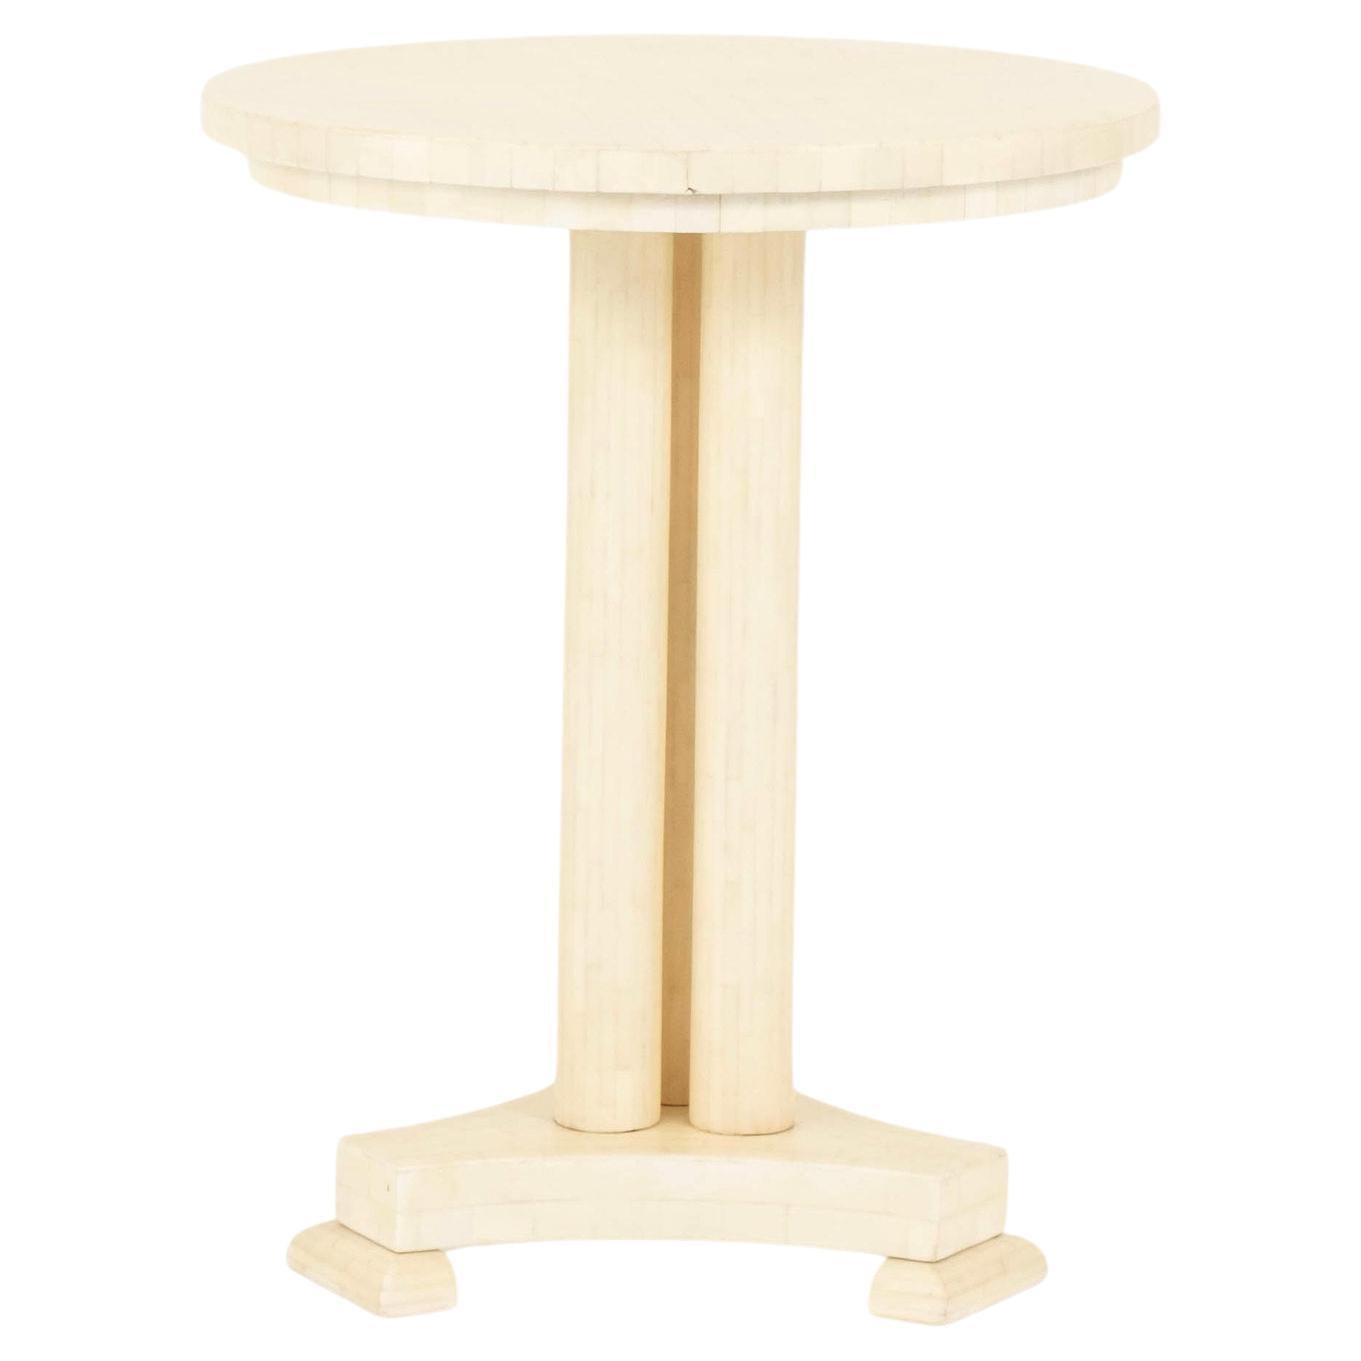 Maitland Smith Tesselated Horn Occasional Table